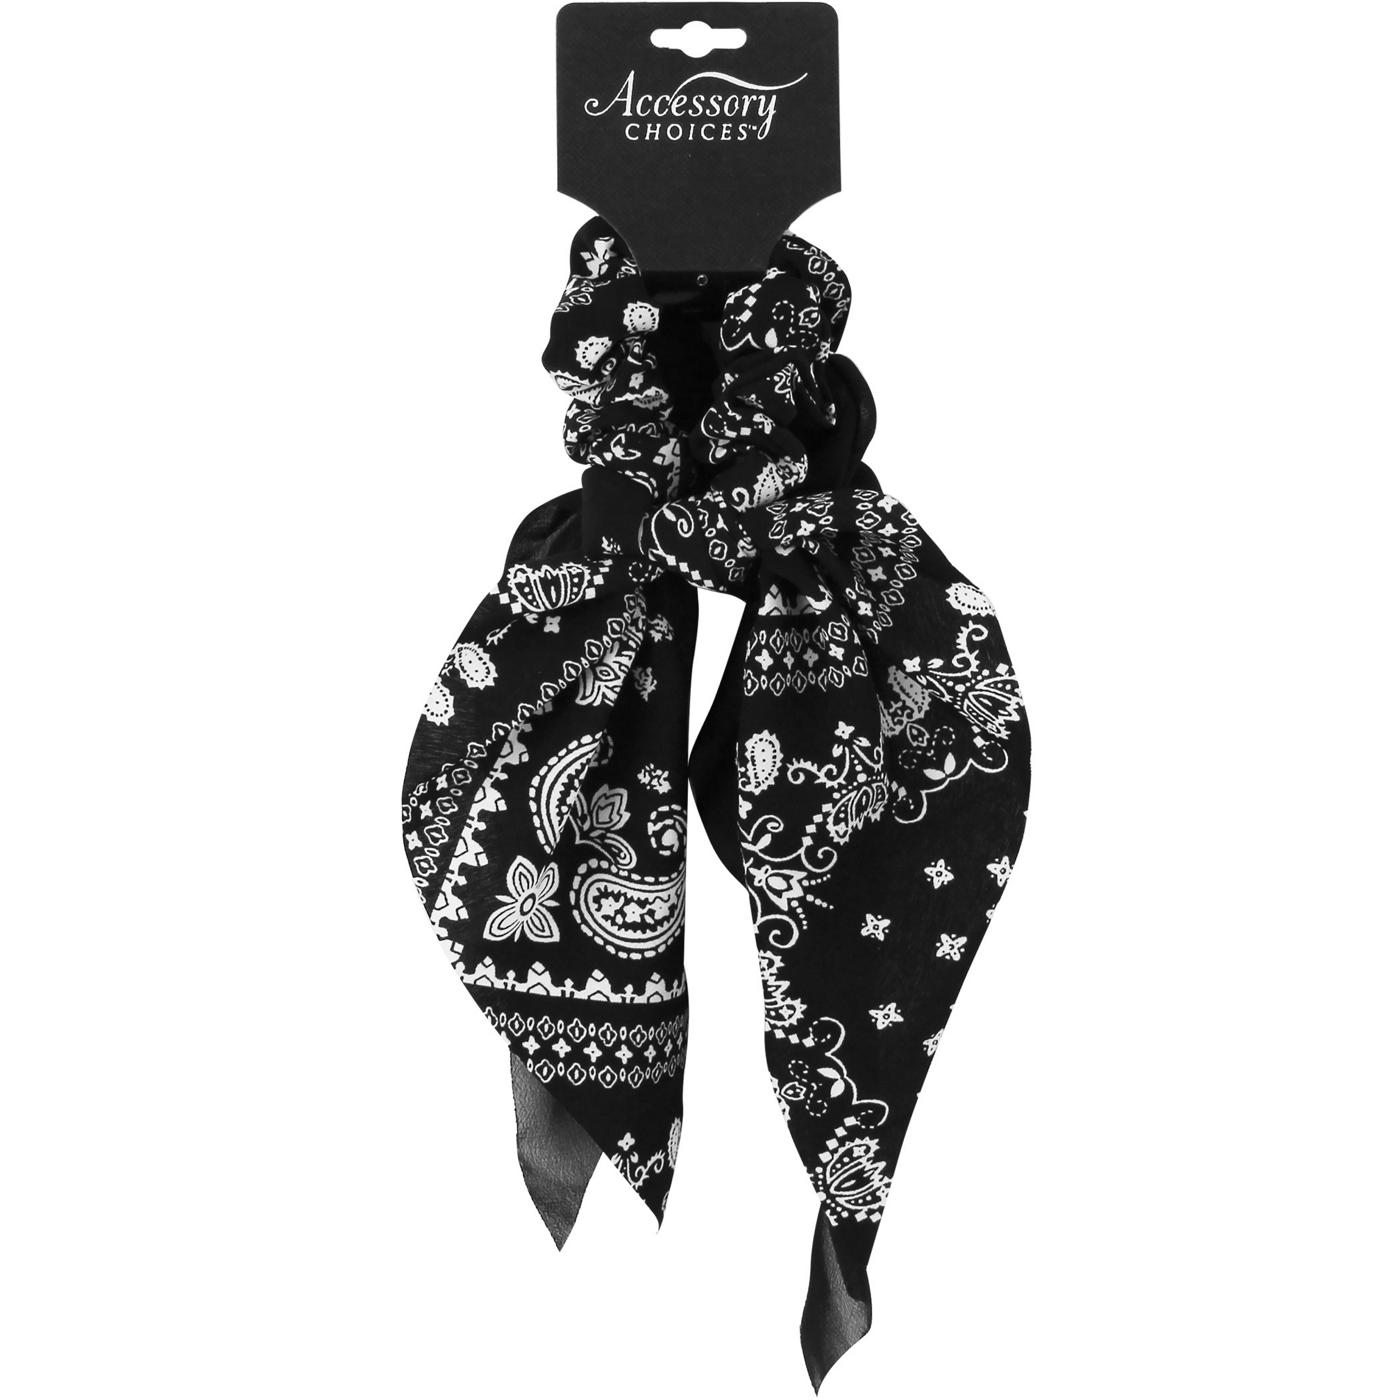 Accessory Choices Bandana Knotted Tail Hair Scrunchie; image 1 of 2